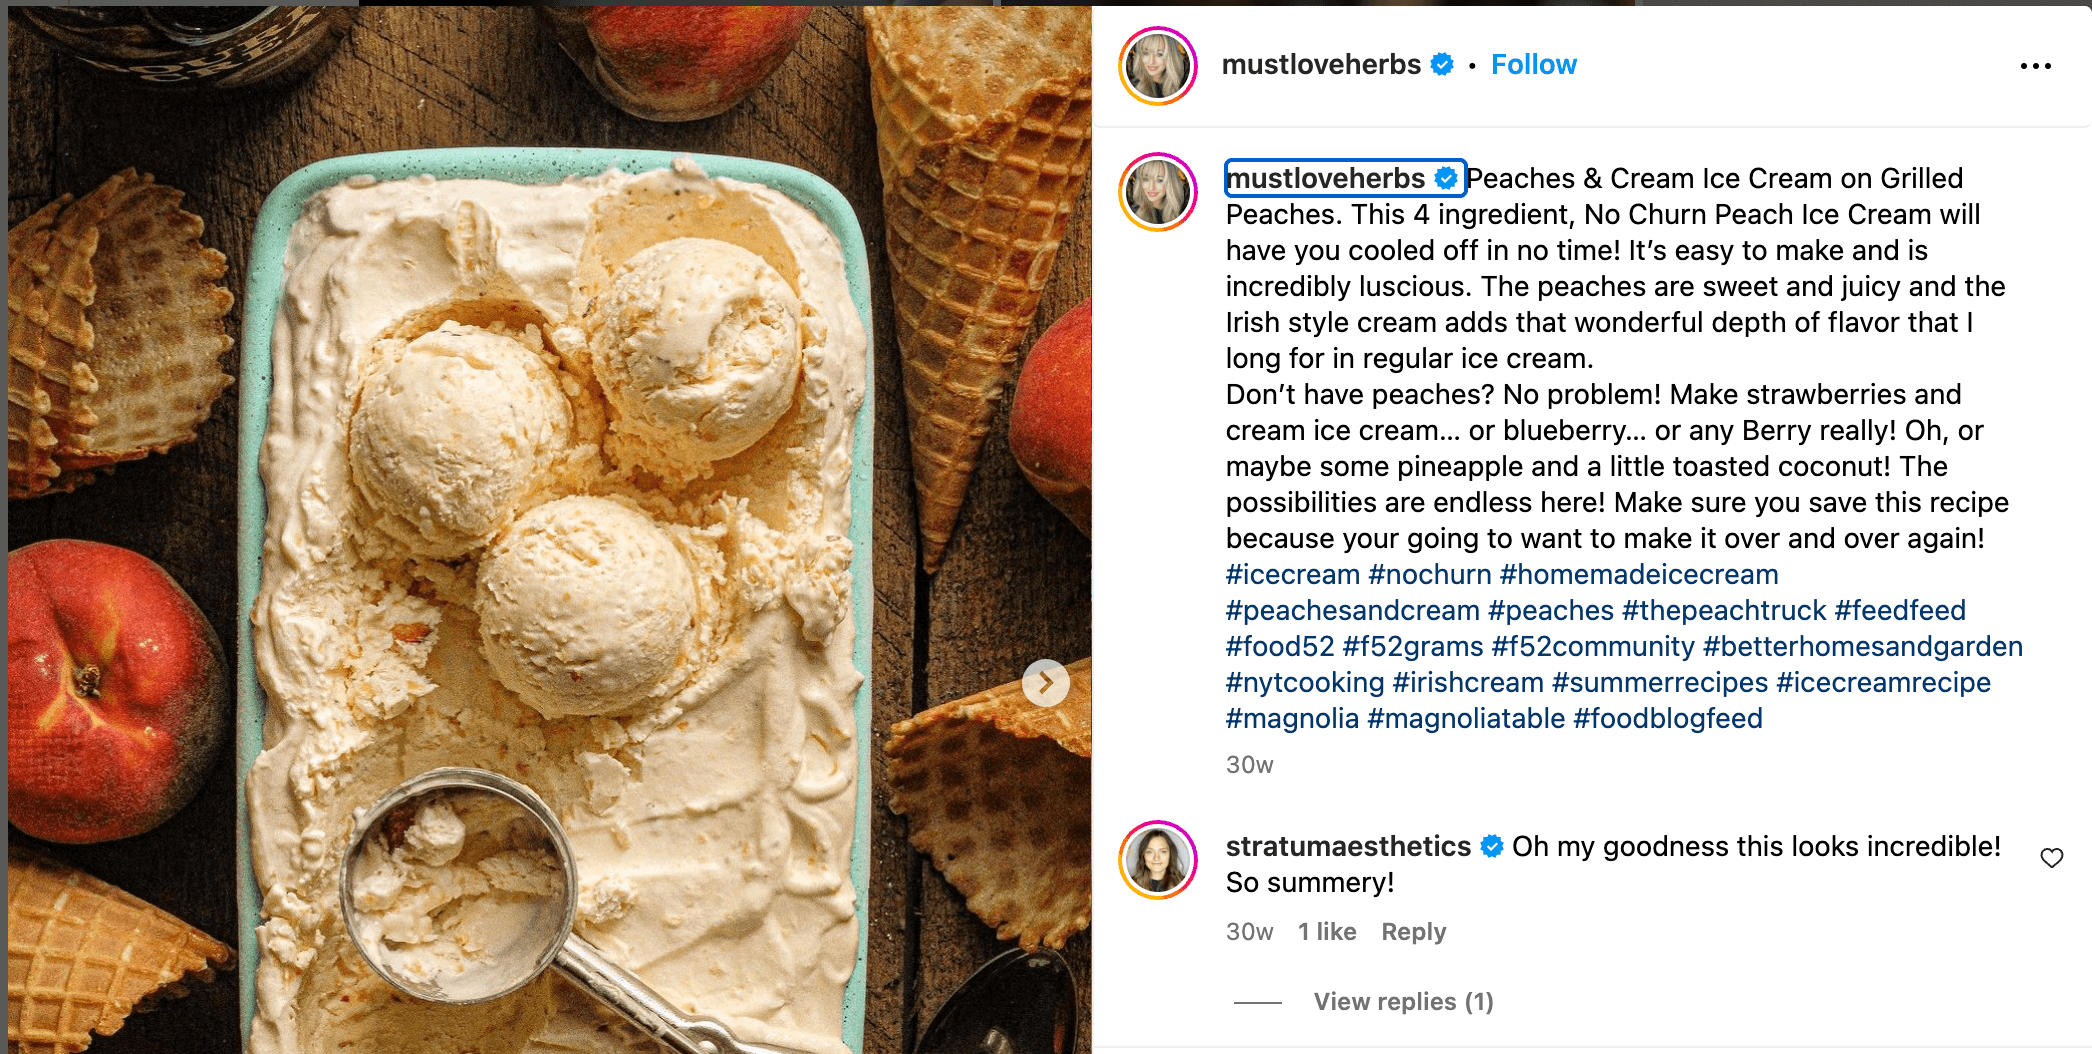 Instagram post from @mustloveherbs that shows Peaches & Cream Ice Cream on Grilled Peaches